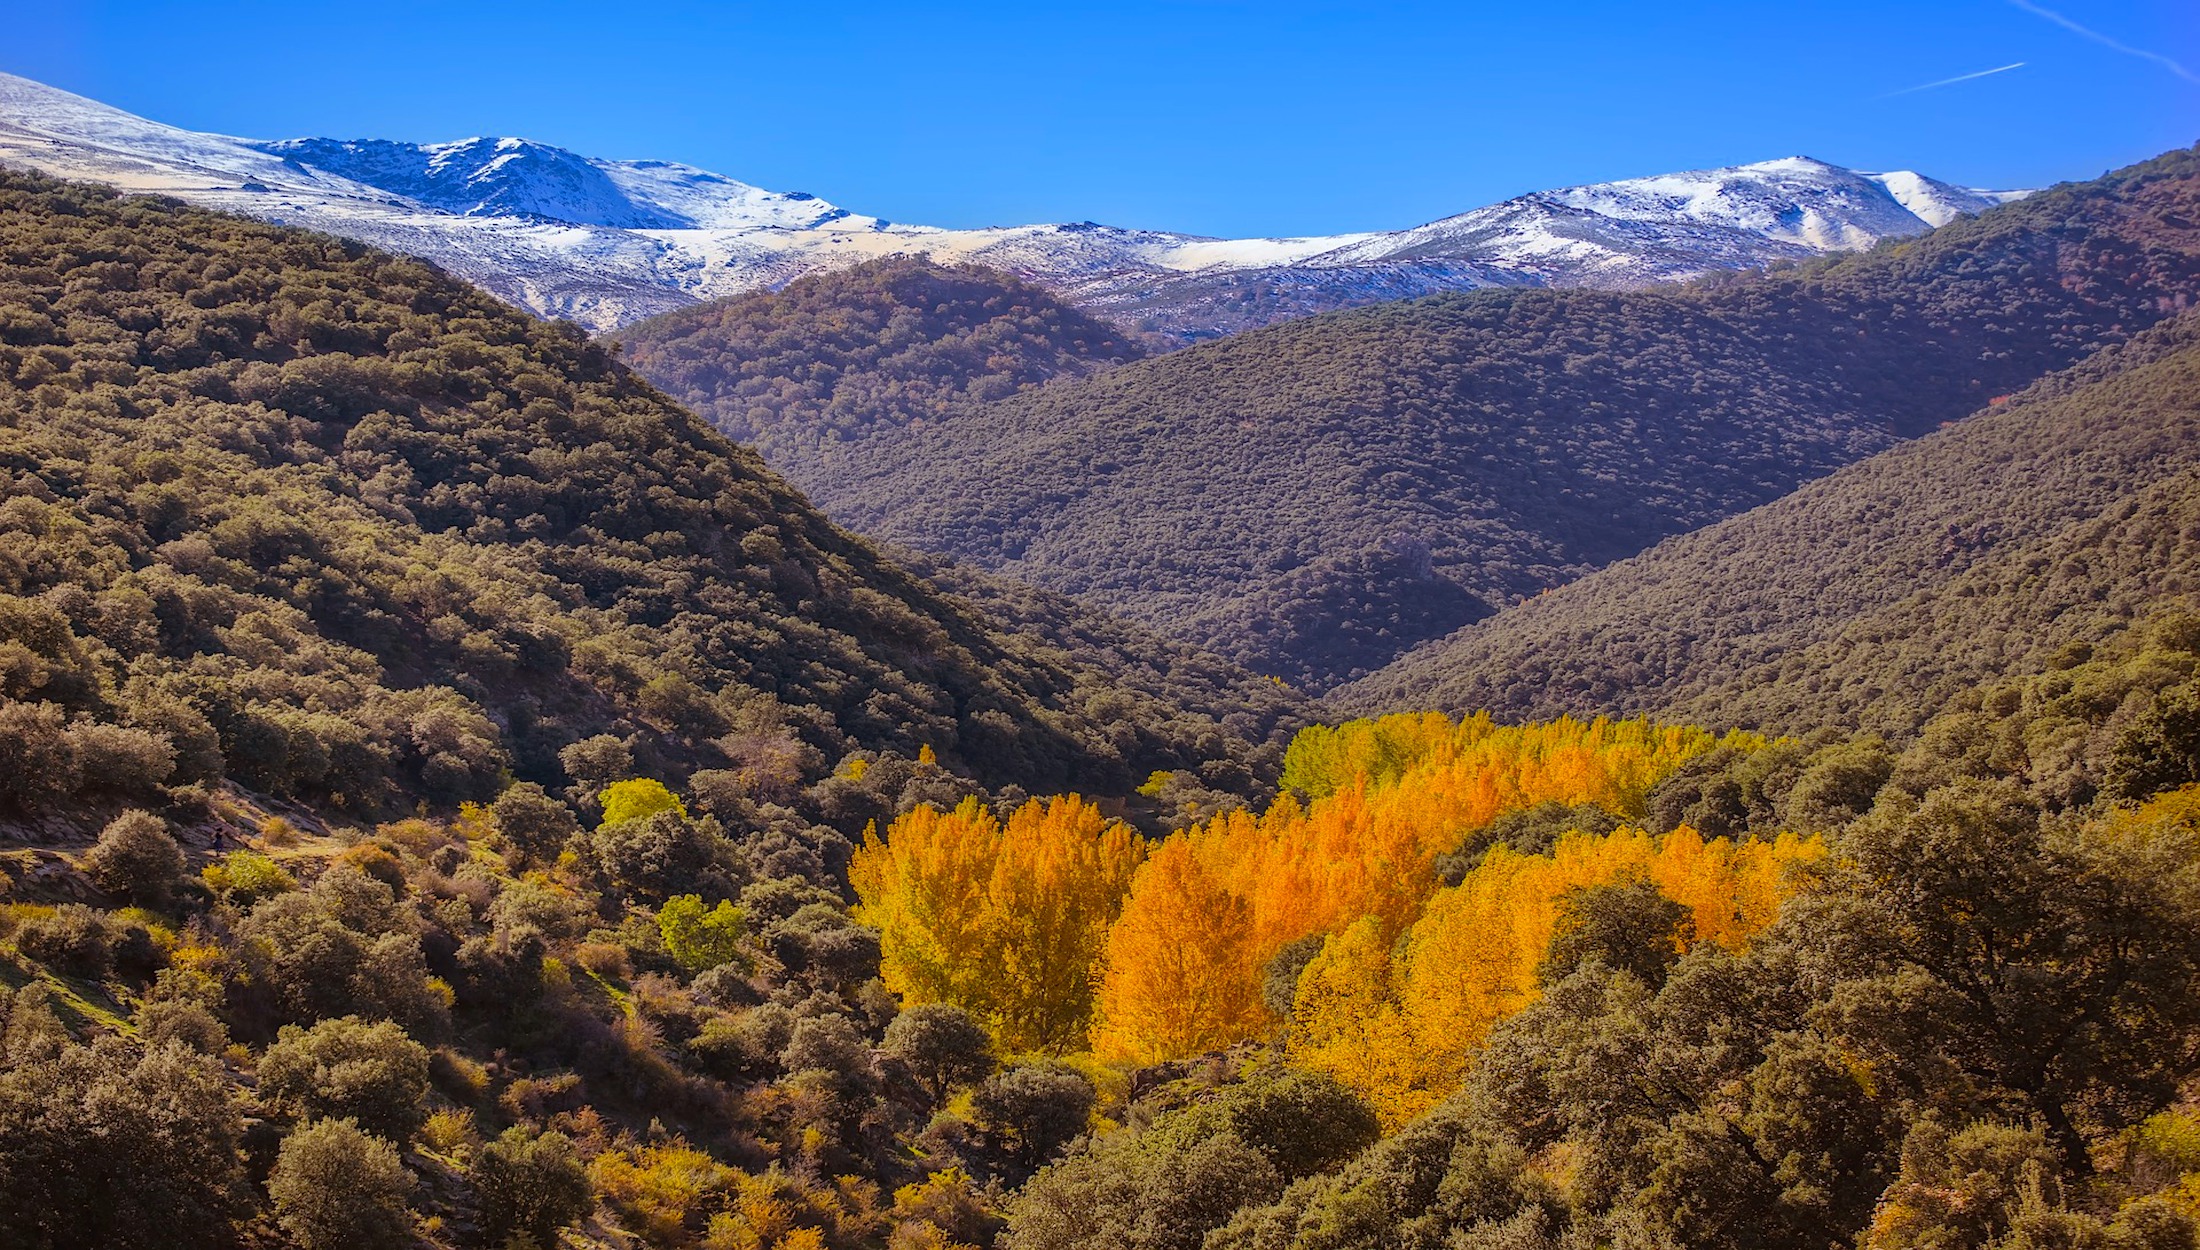 Green mountain range with orange and yellow trees during the fall season with snowed mountains in the background